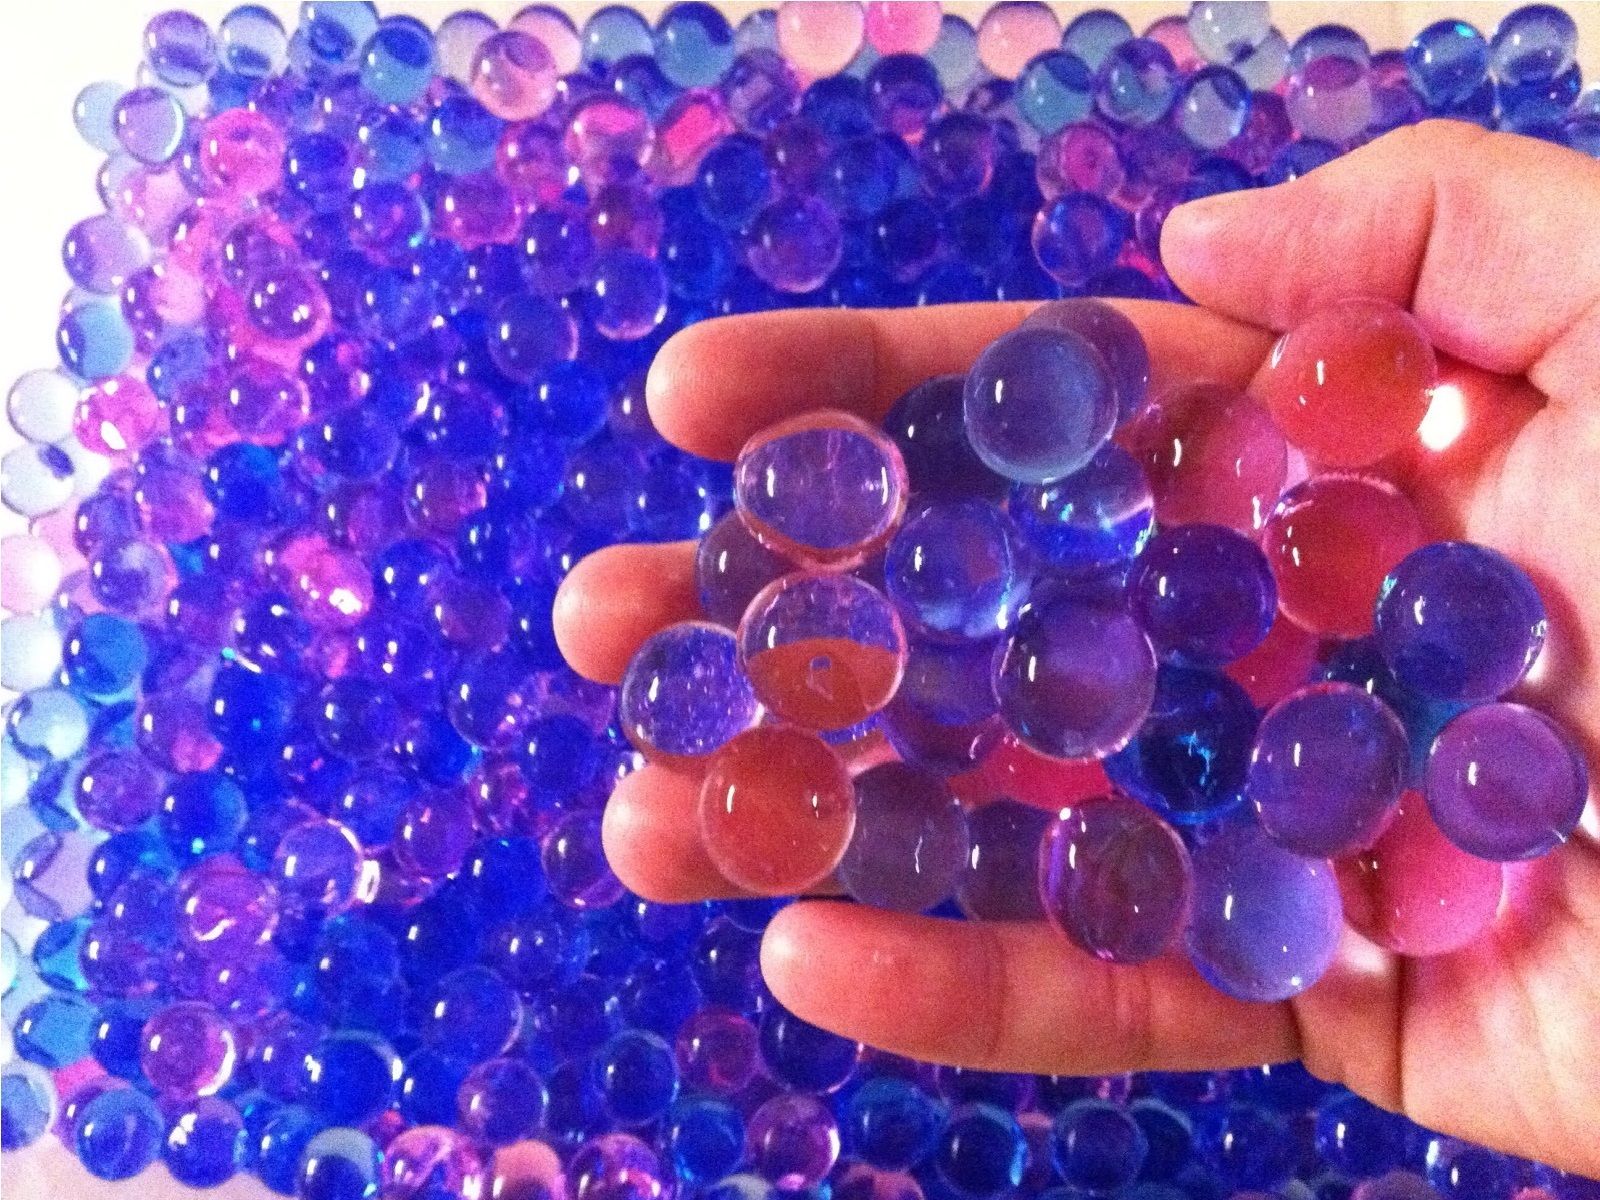 Water Beads HD Wallpaper Abstract